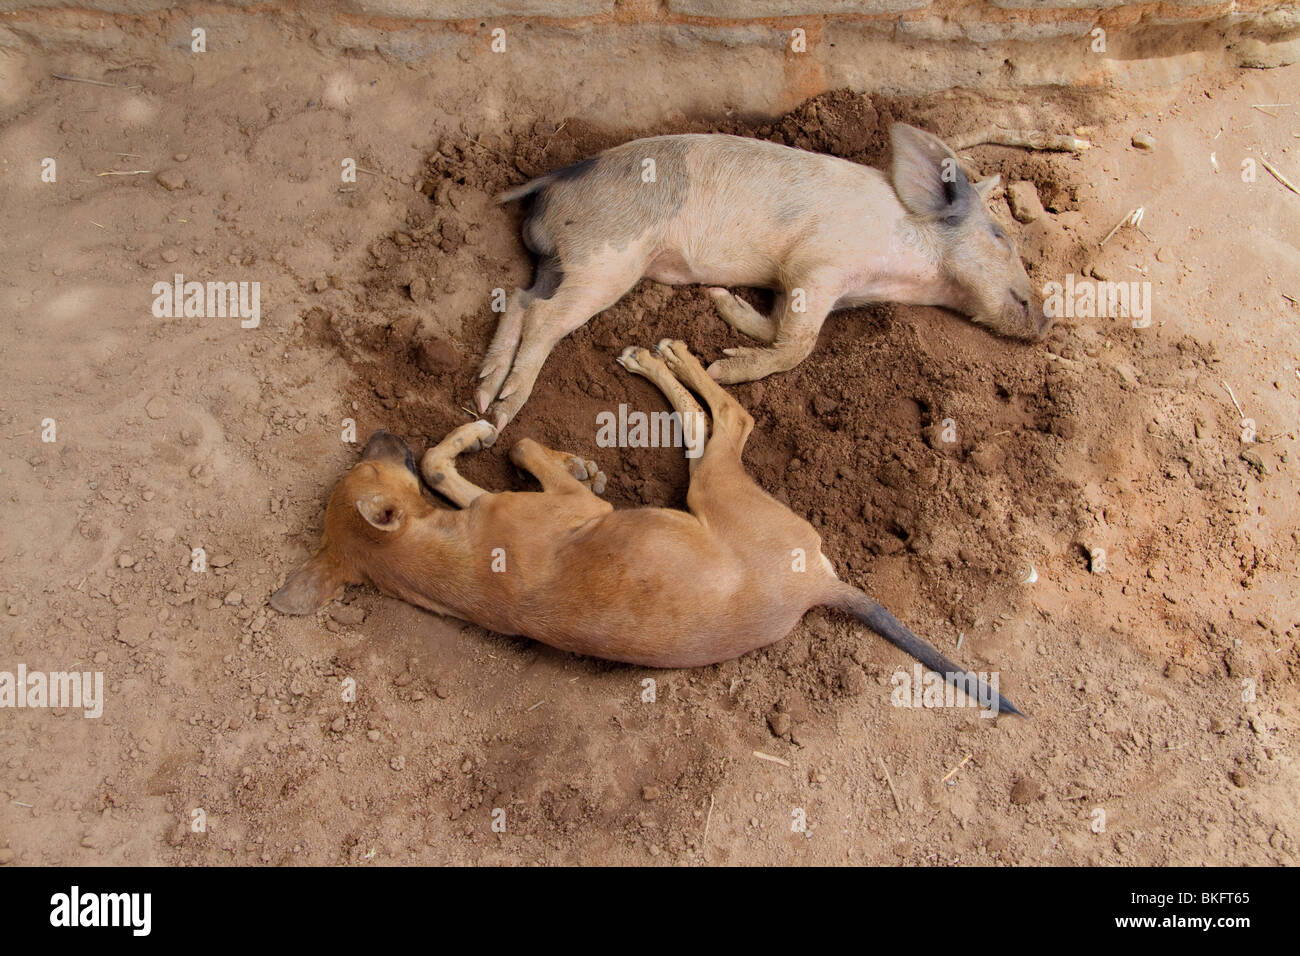 A piglet and a puppy resting together on a wet spot of soil during a hot day, Cameroon Stock Photo